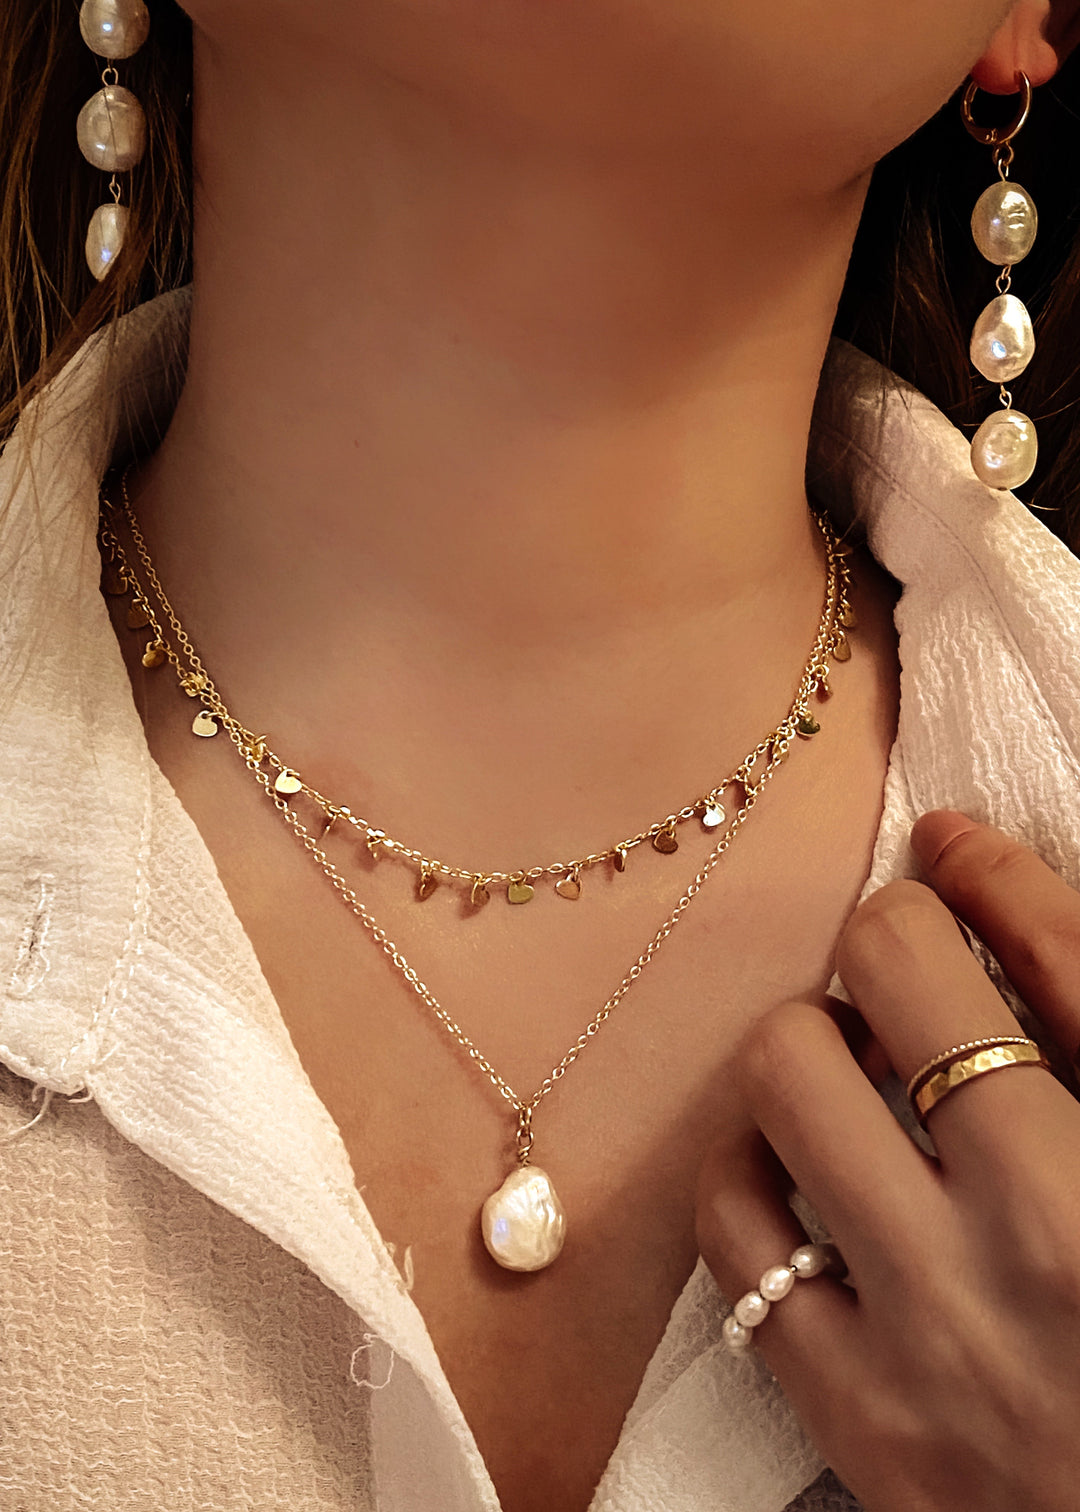 Stella Pearl Necklace - Gold Filled